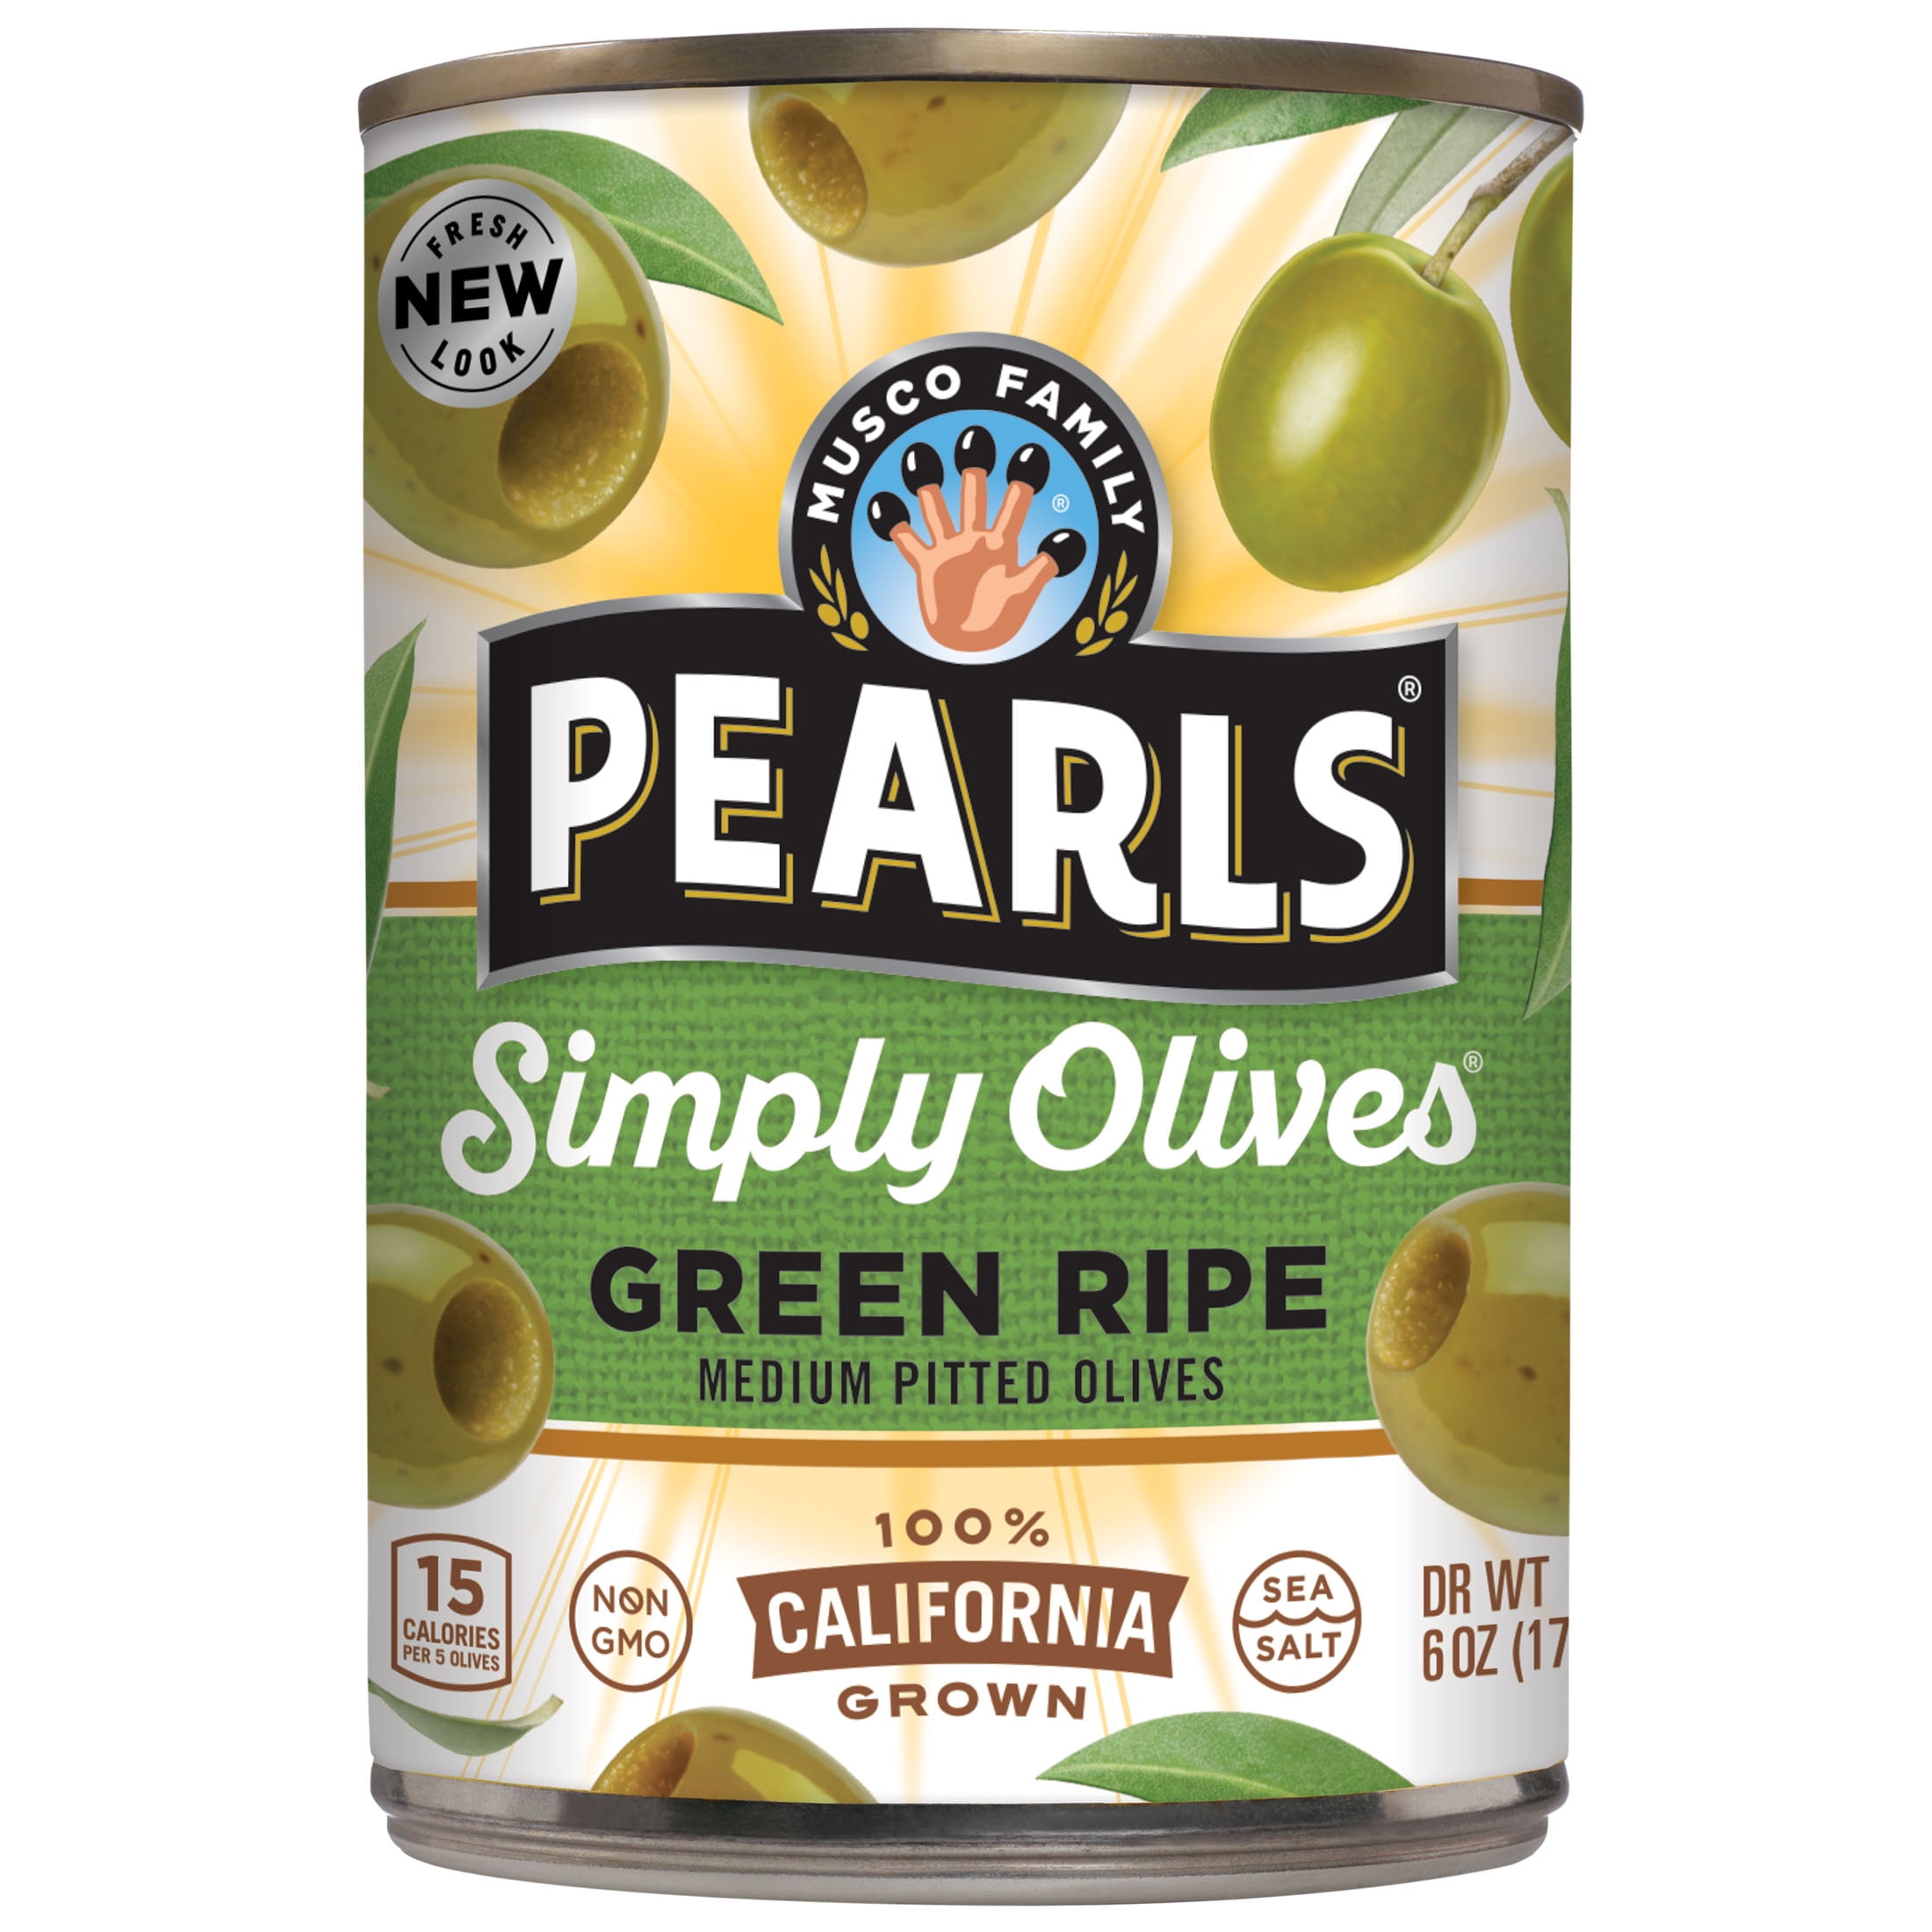 The Best Simple Green Olives Substitutes